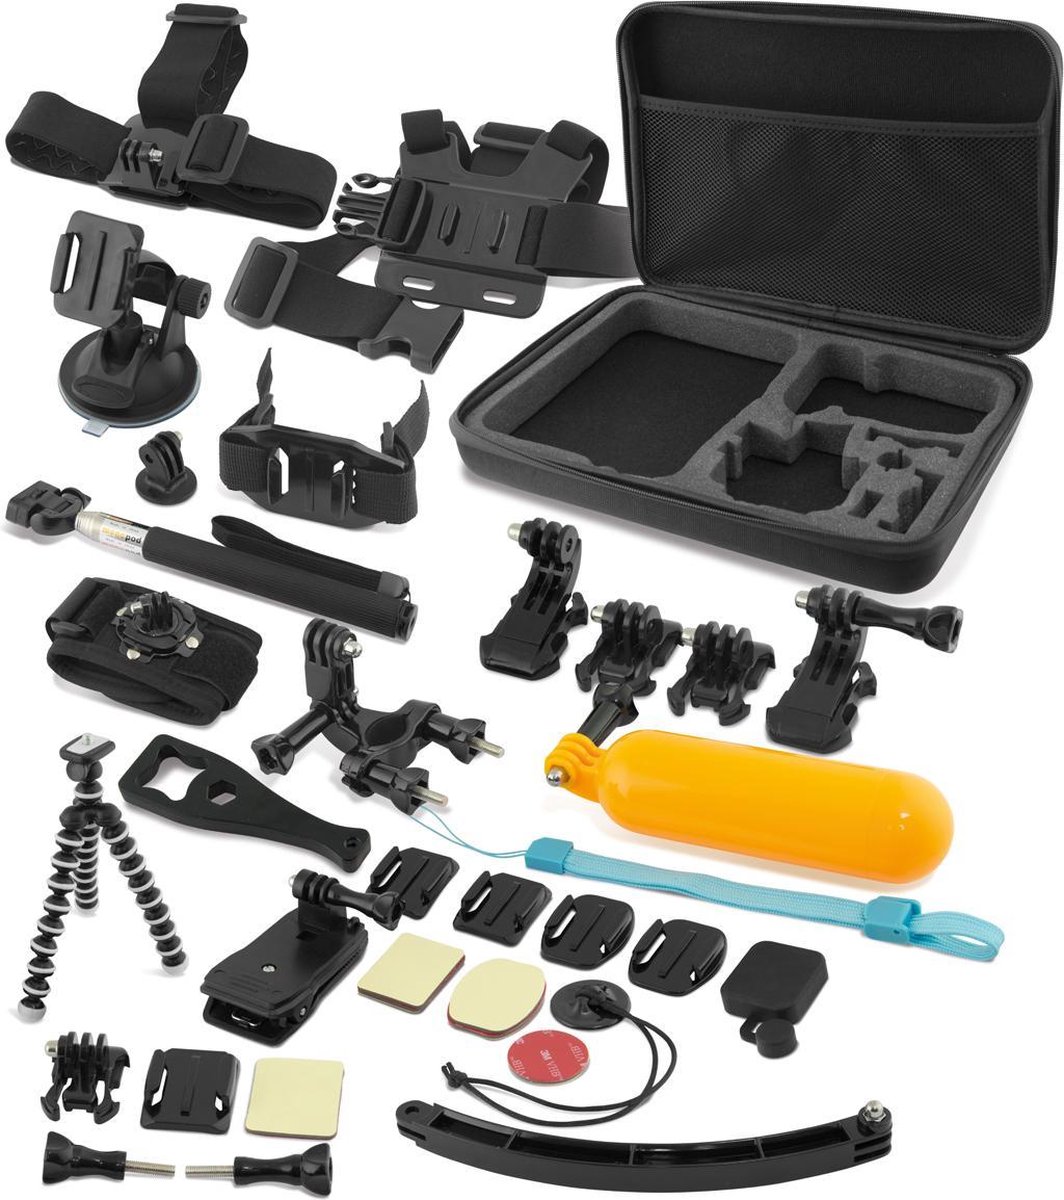 Accessories for Sports Camera (38 pcs)